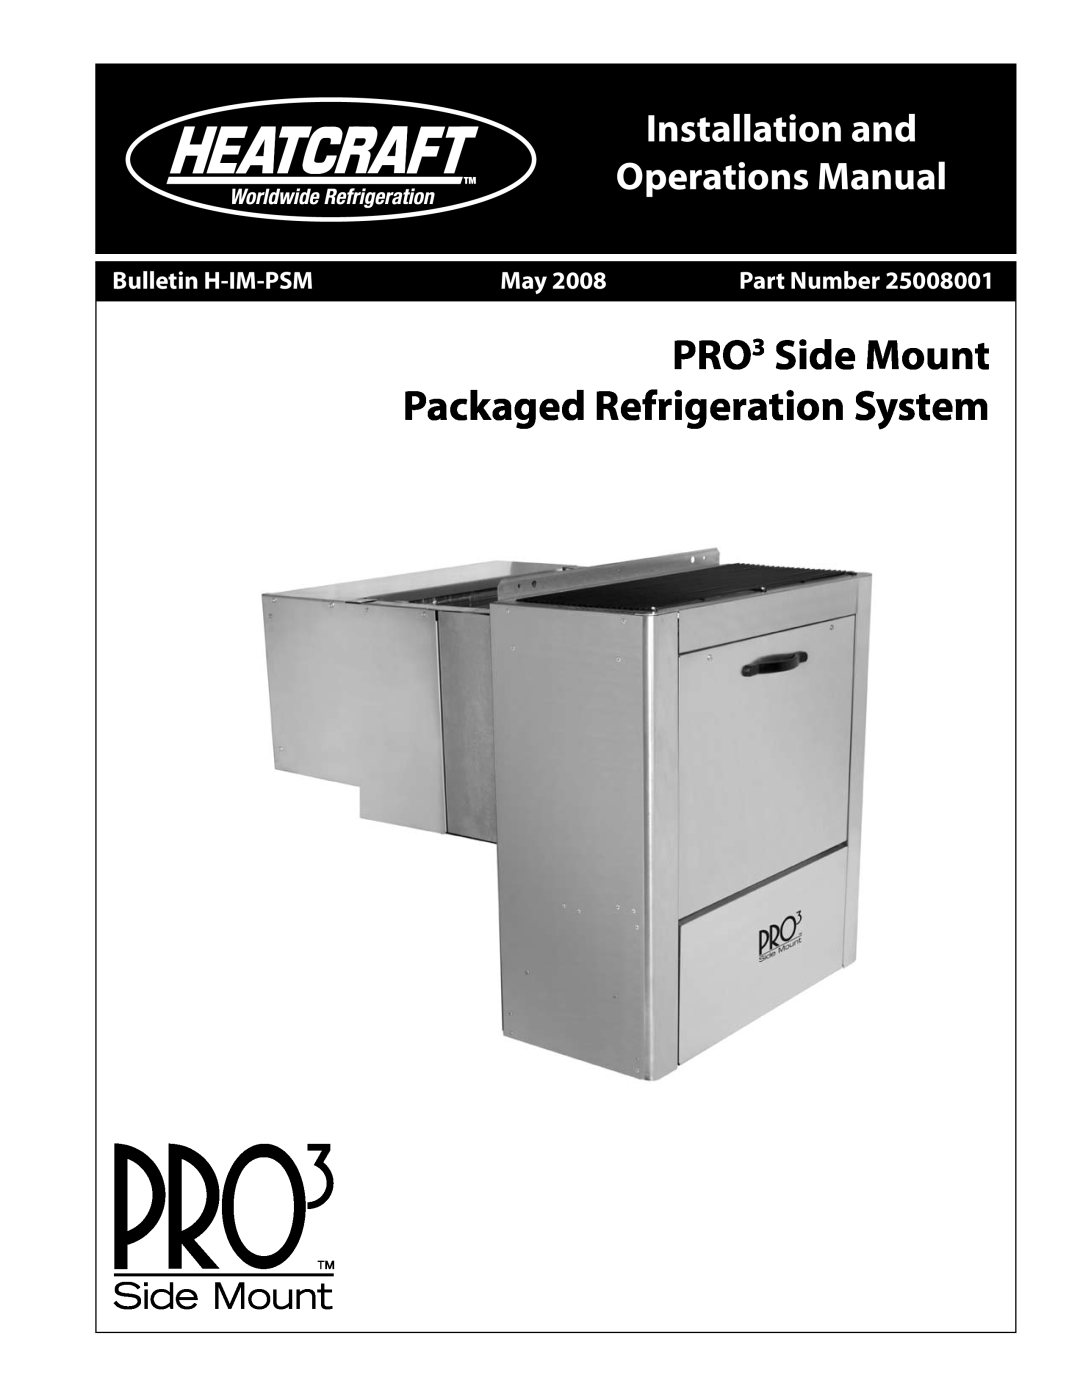 Heatcraft Refrigeration Products manual Bulletin H-IM-PSM, Part Number, PRO3 Side Mount Packaged Refrigeration System 